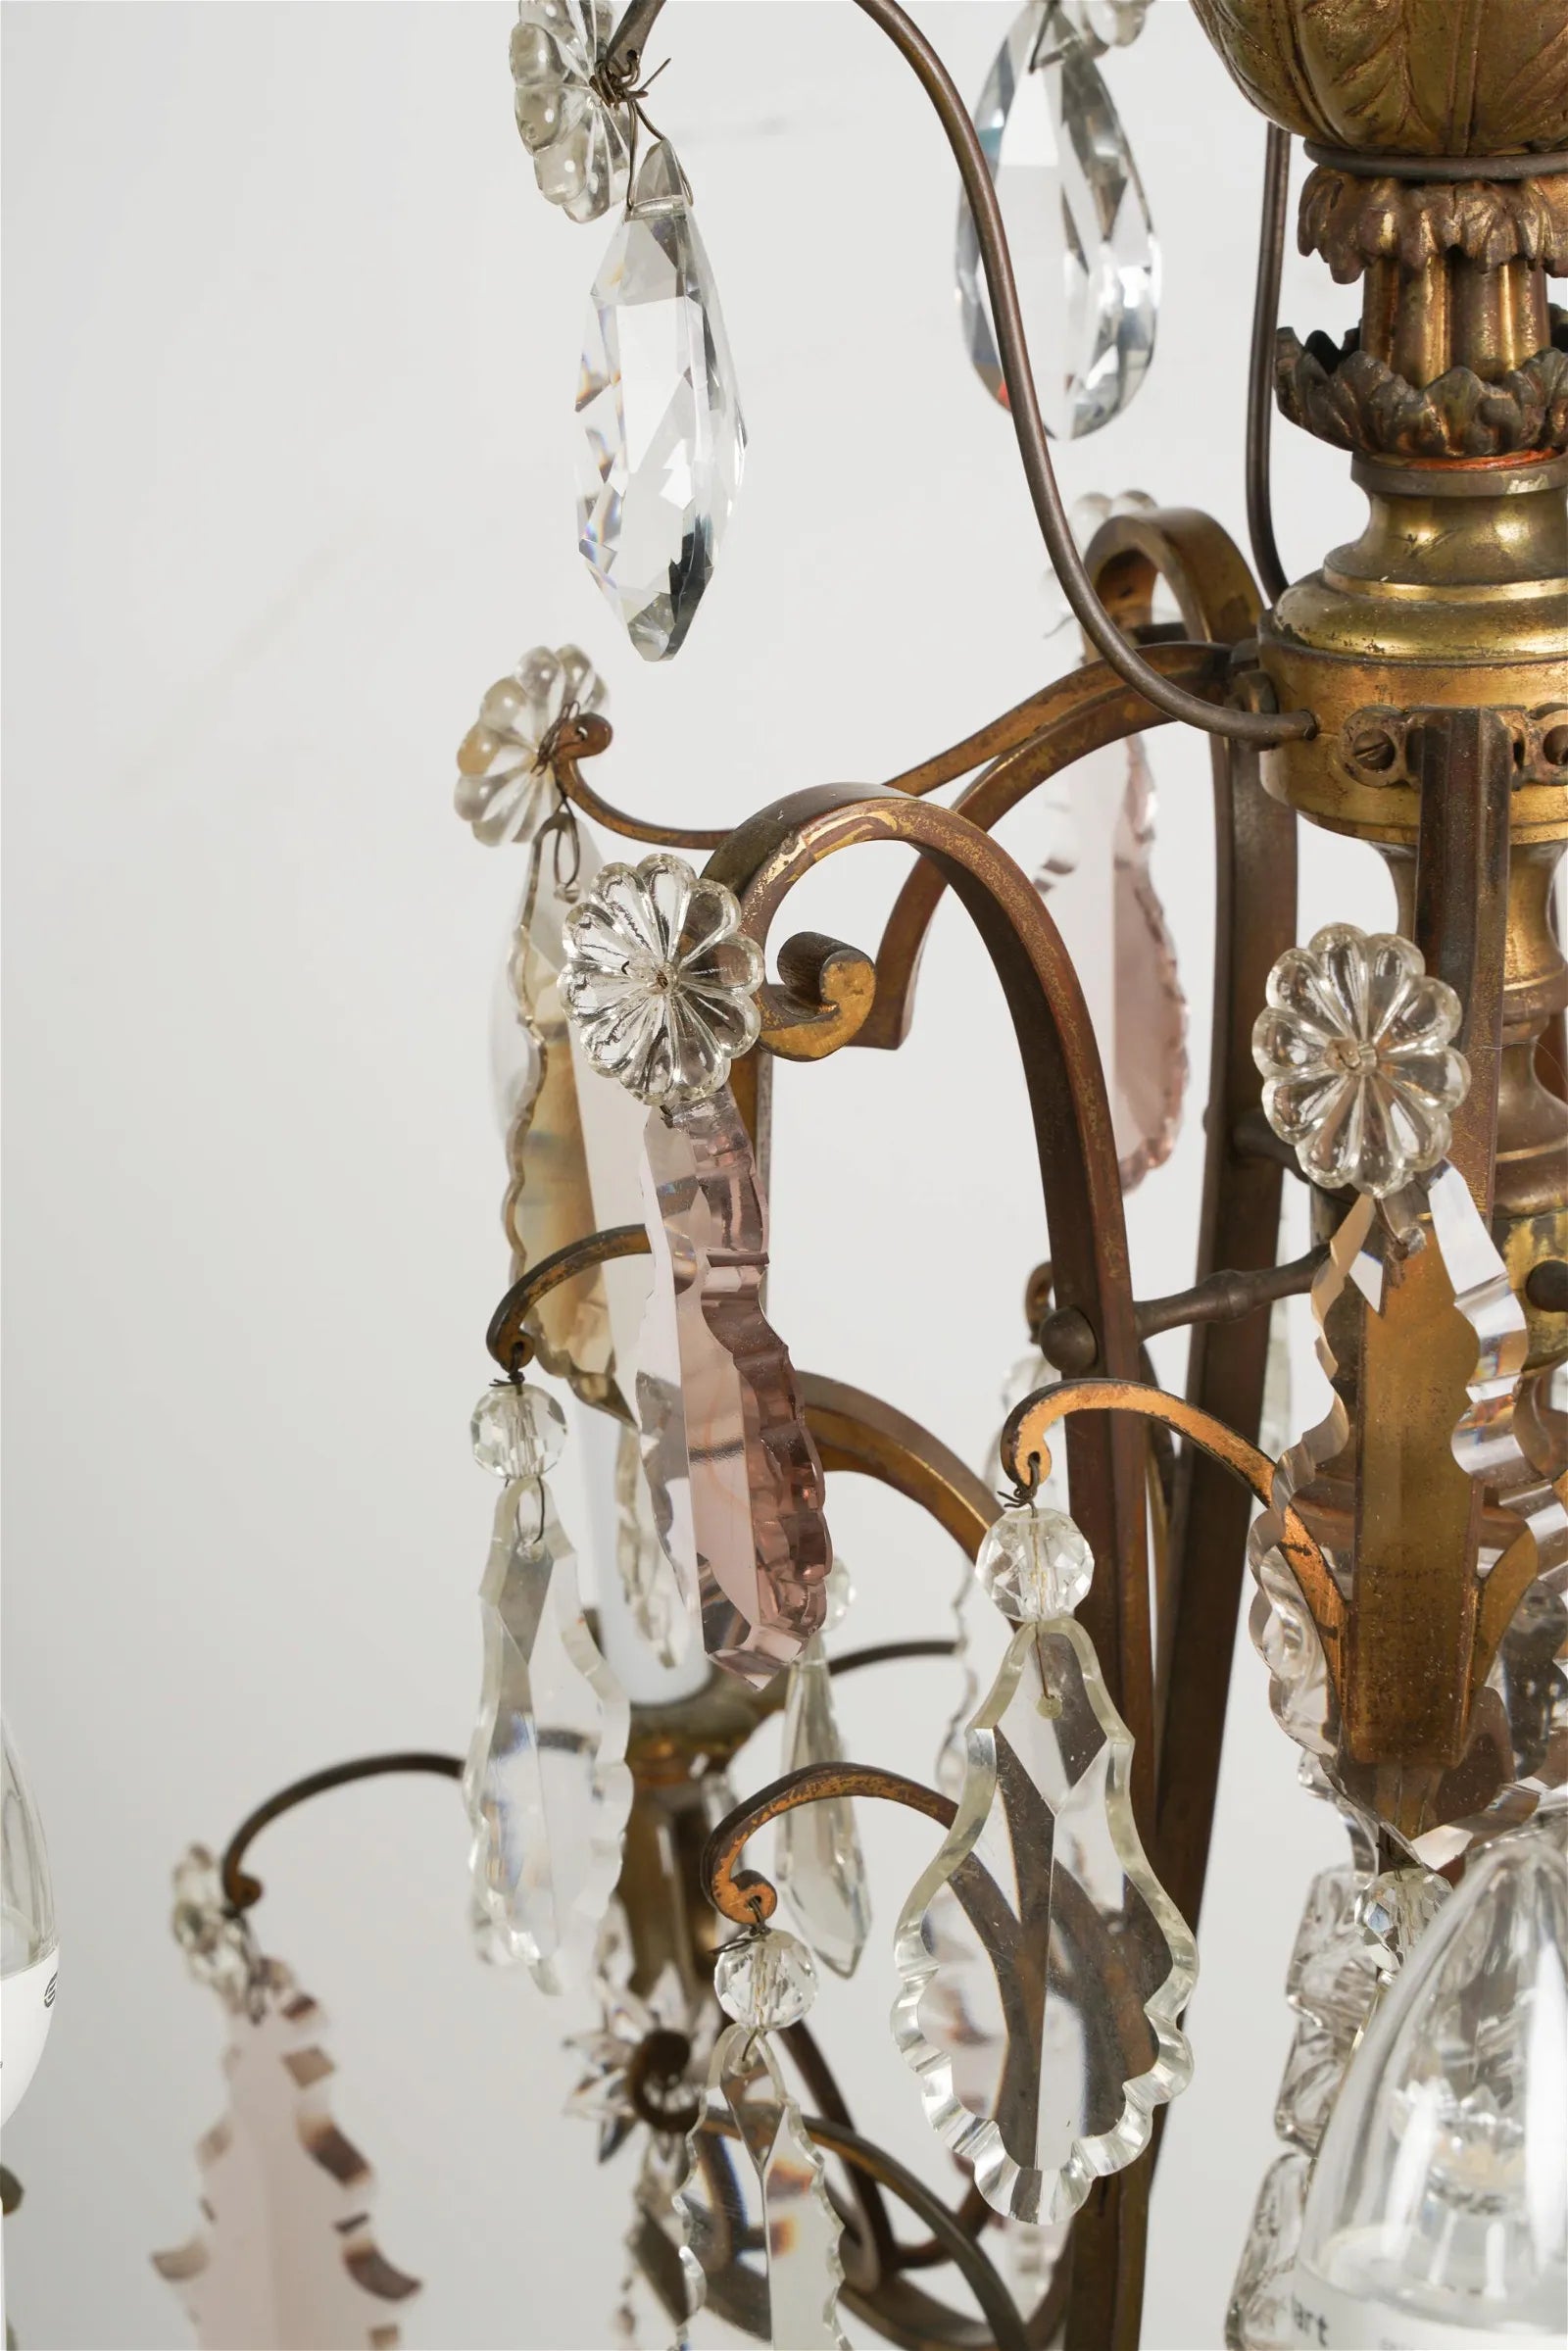 AL1-064: EARLY 20TH CENTURY FRENCH CRYSTAL & BRASS 8 LIGHT CHANDELIER